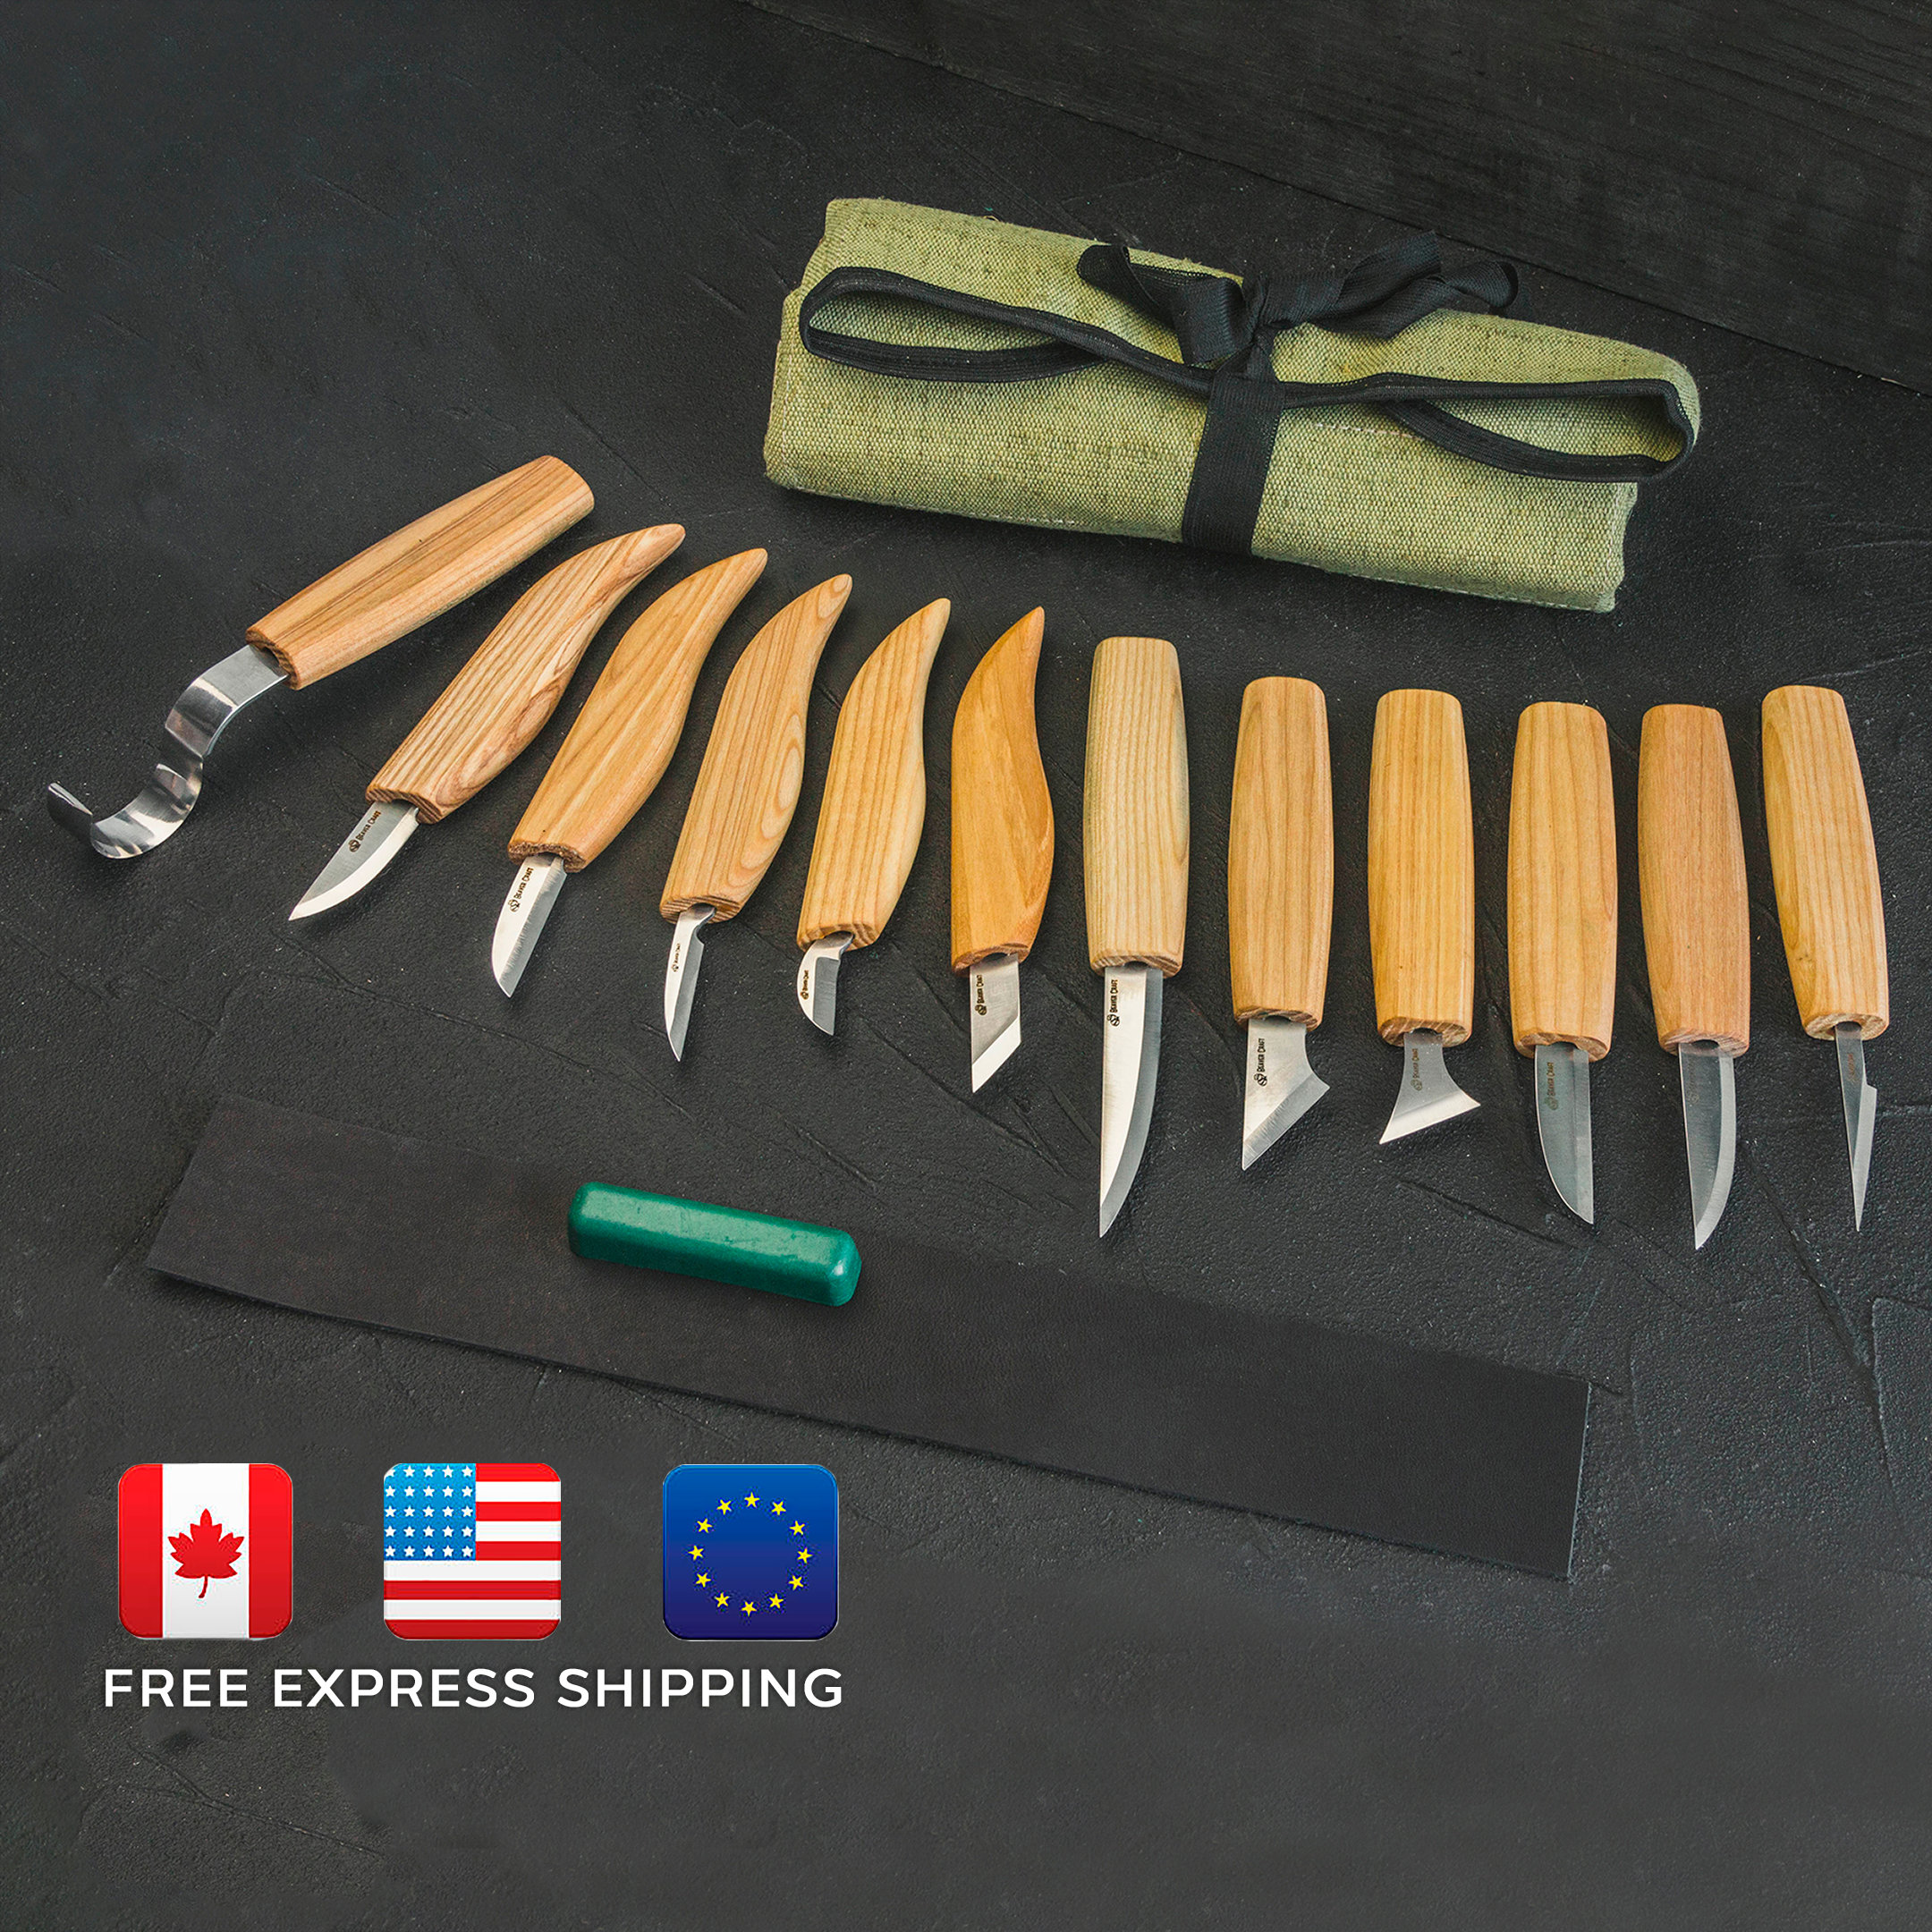 pfeil Swiss made - Left and Right Hand Marking Knives